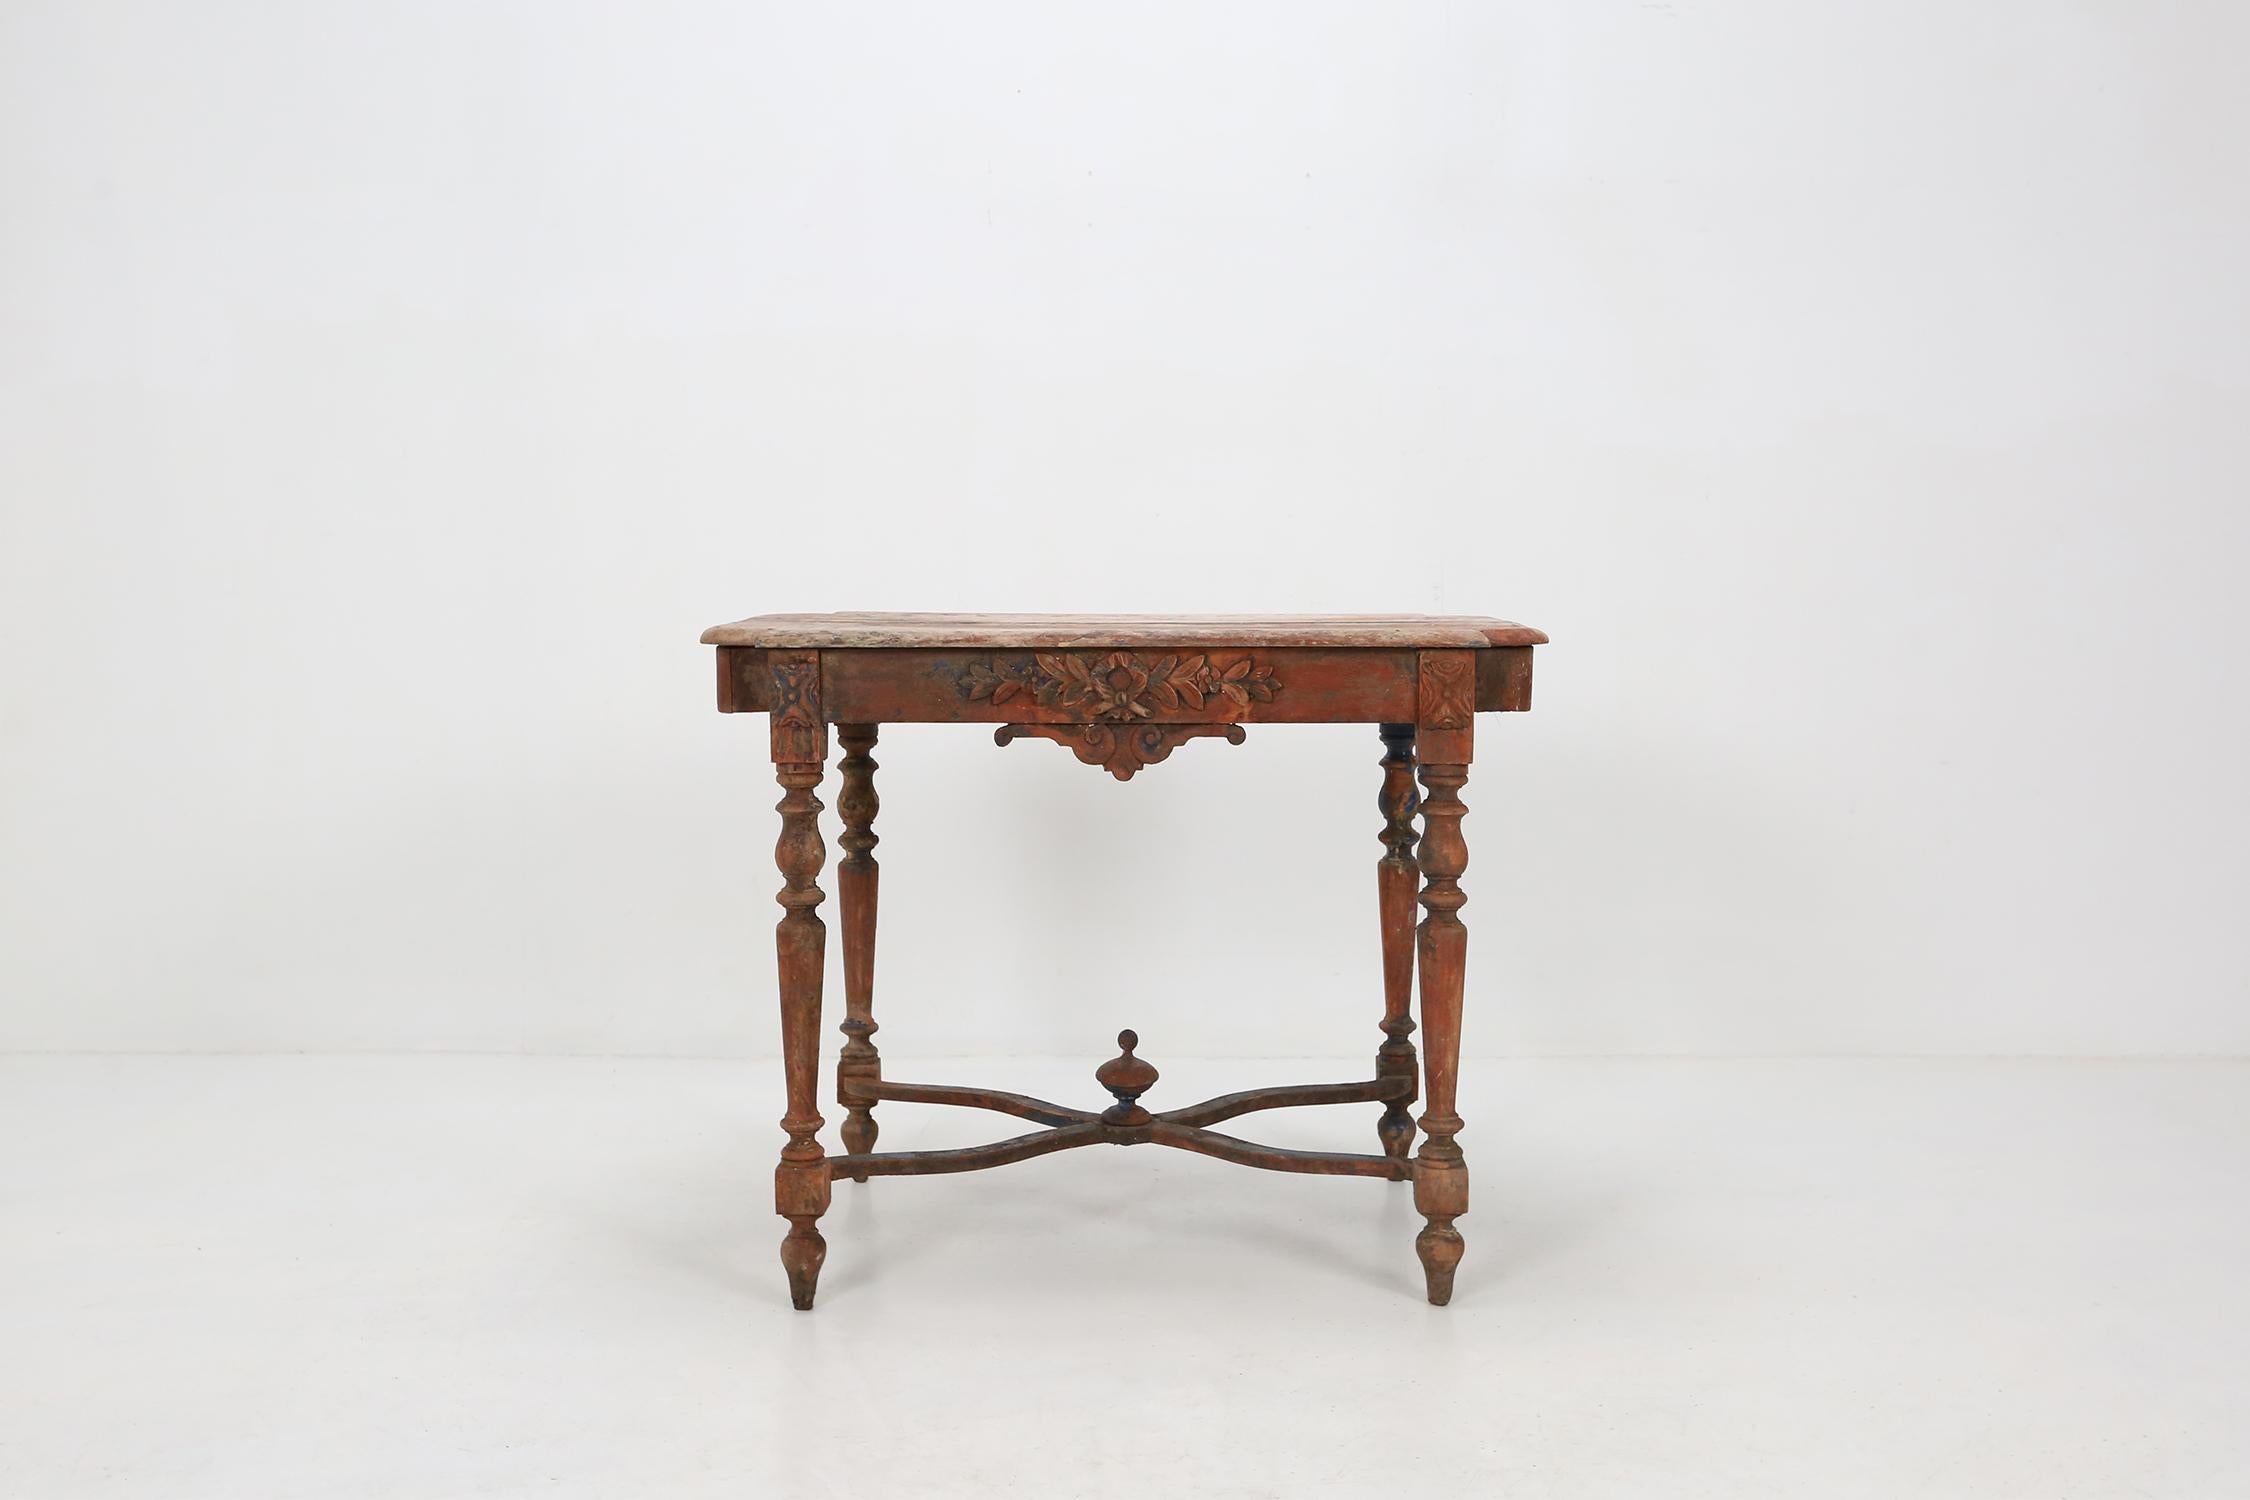 Antique rustic center table with some beautiful sculptural details and great patina on the wood.